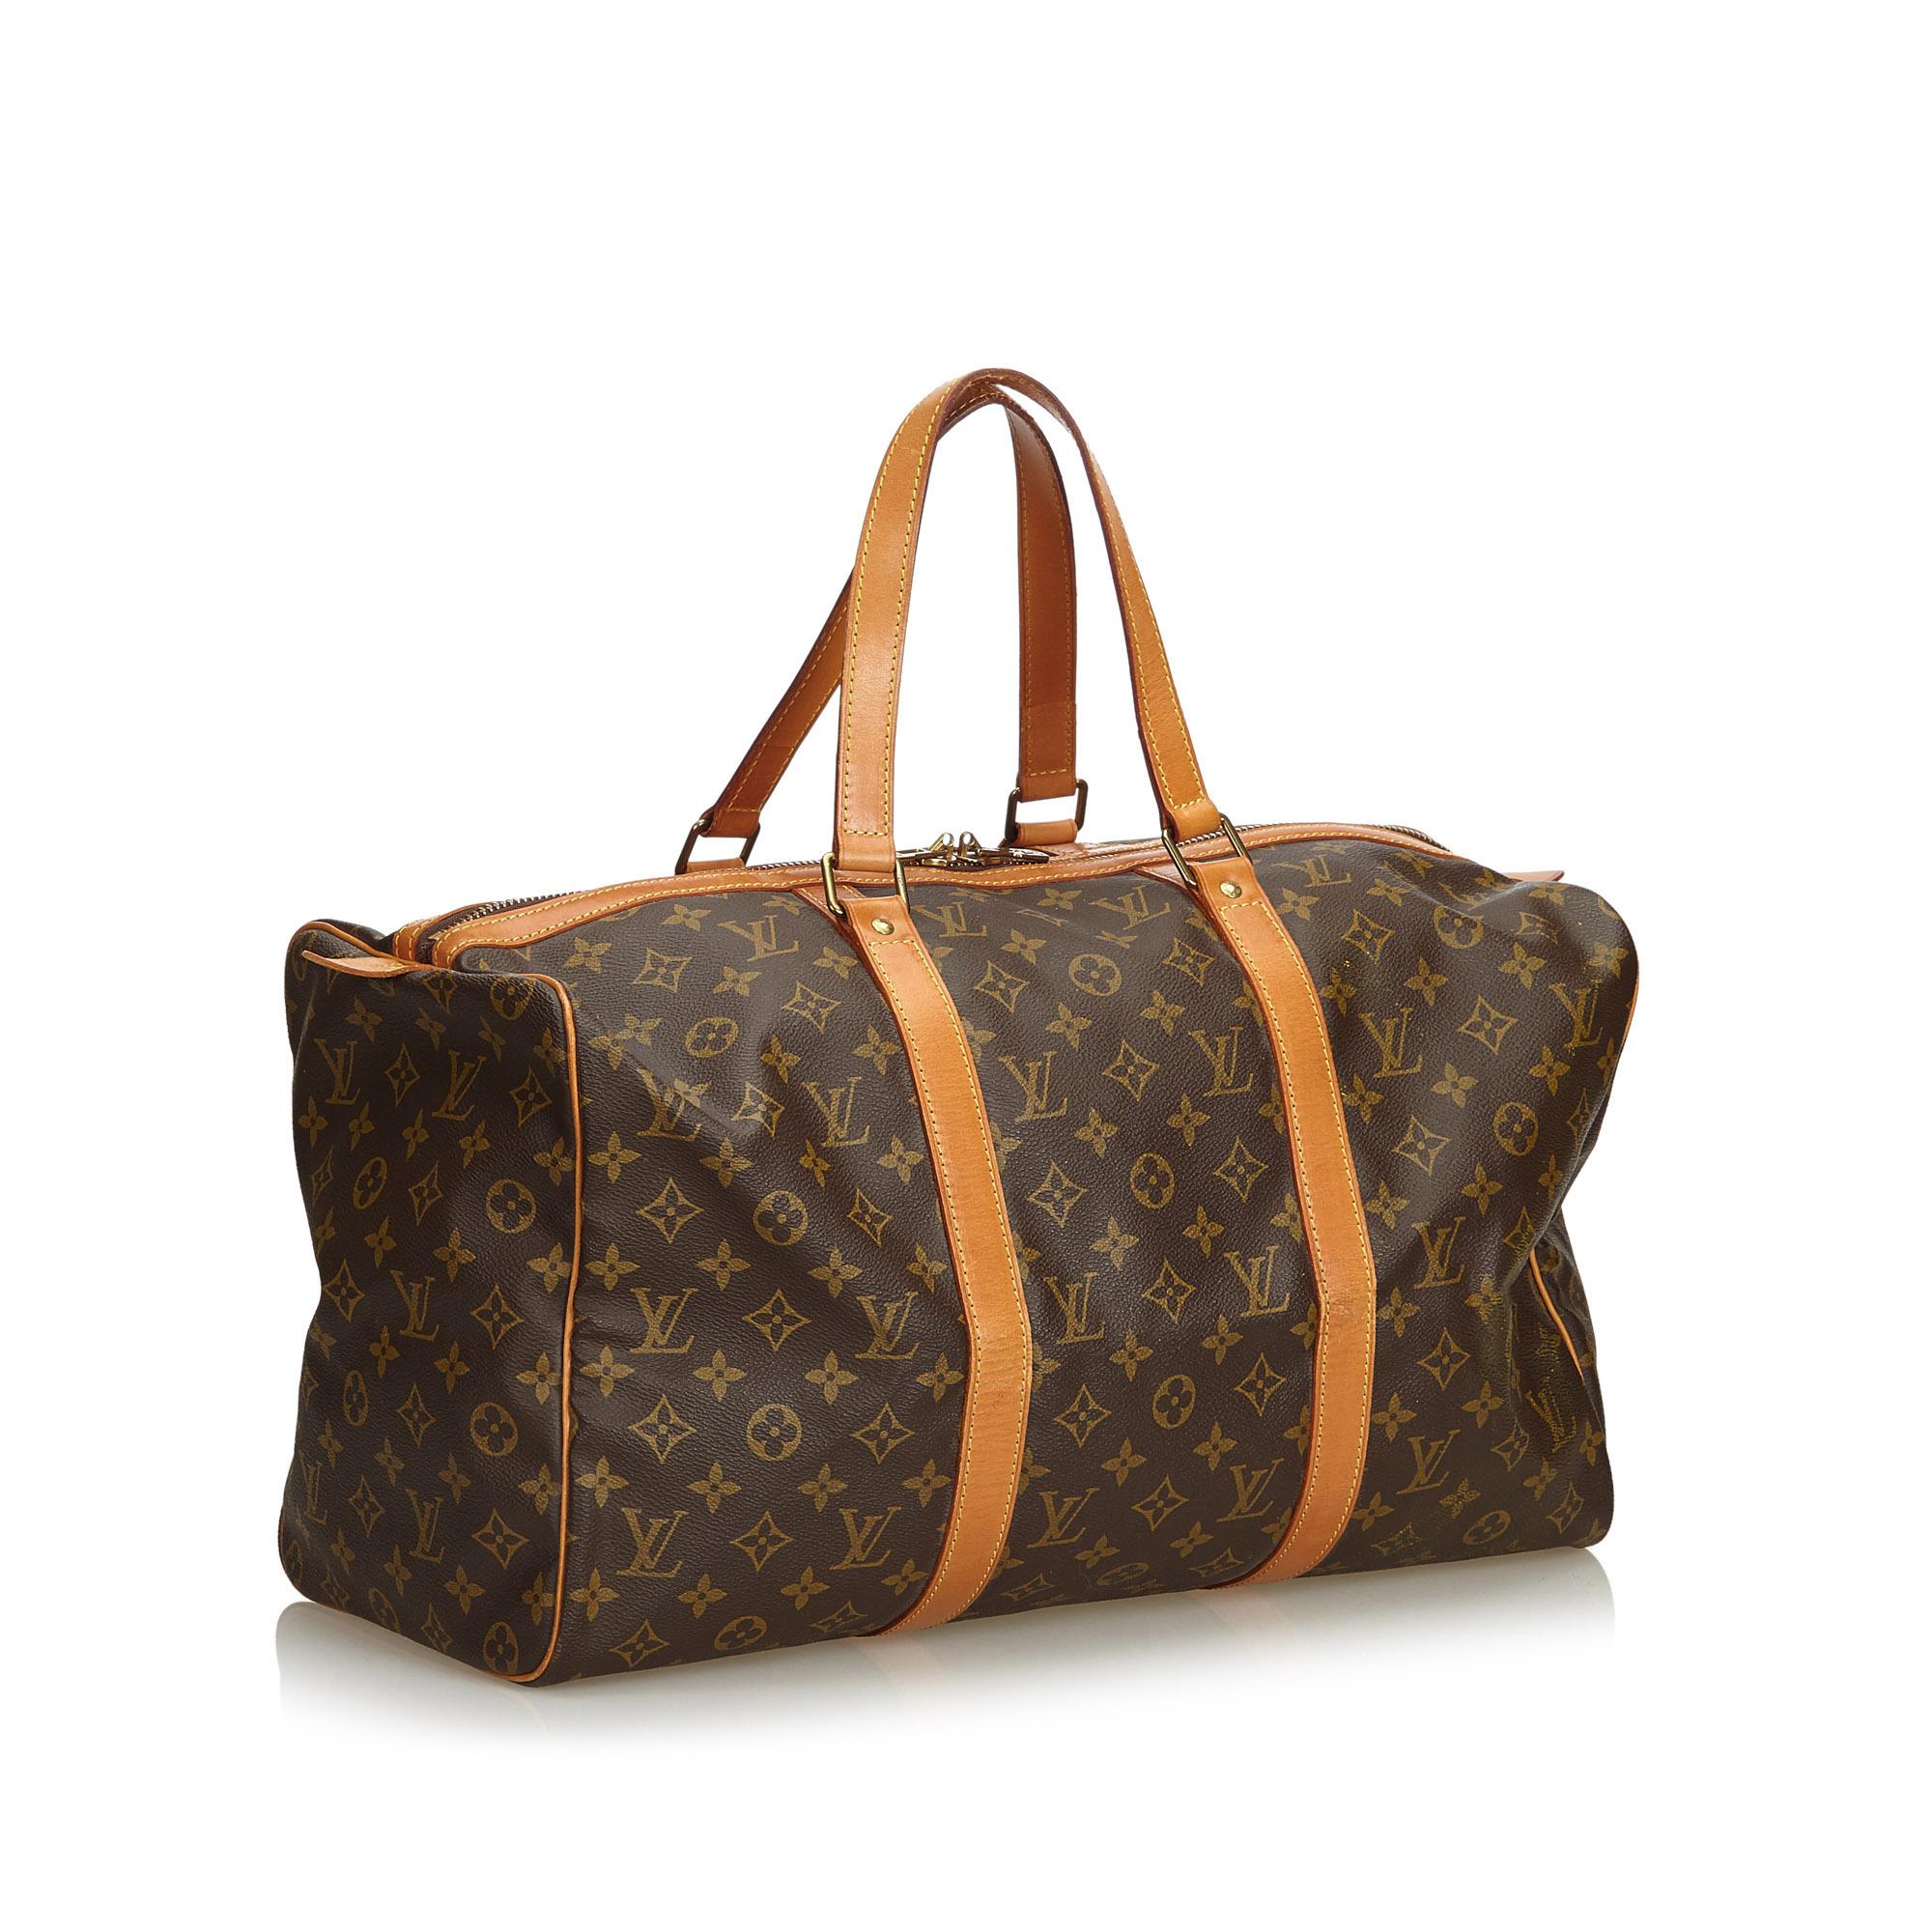 The Sac Souple 45 features a monogram canvas body, flat leather handles and a top zip closure. It carries as B condition rating.

Inclusions: 
This item does not come with inclusions.


Louis Vuitton pieces do not come with an authenticity